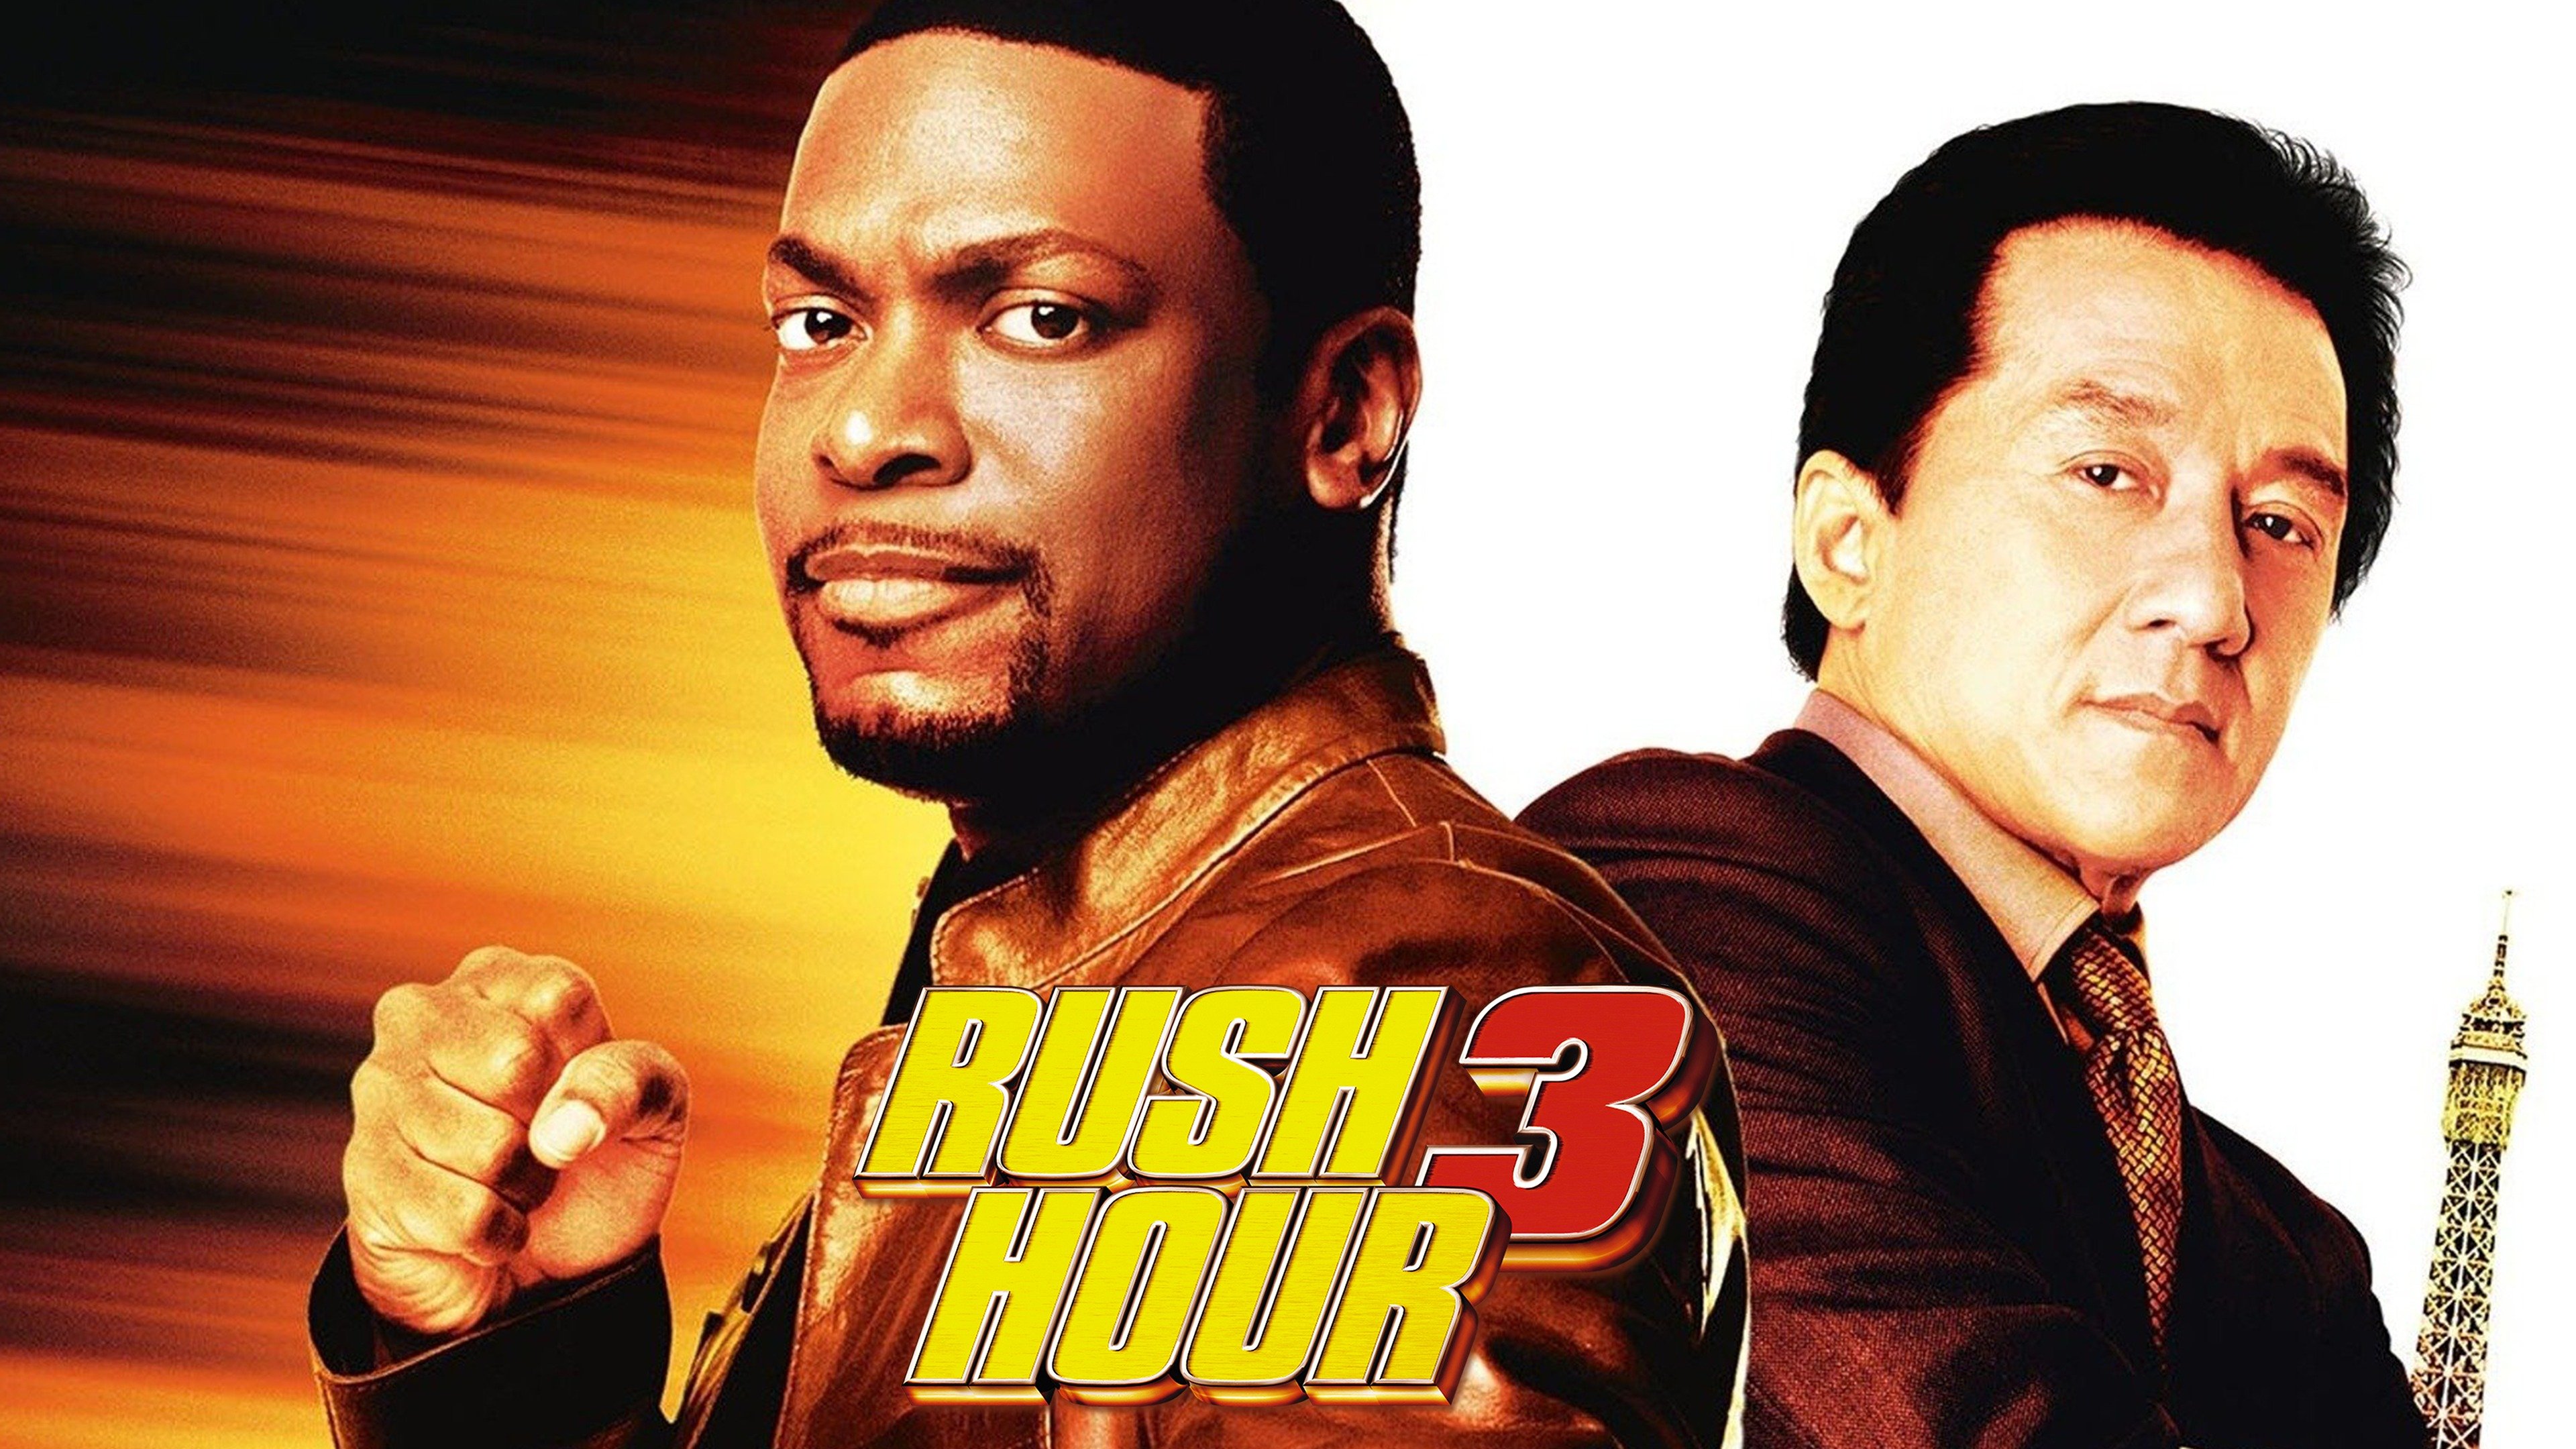 How to watch and stream Rush - 2013 on Roku